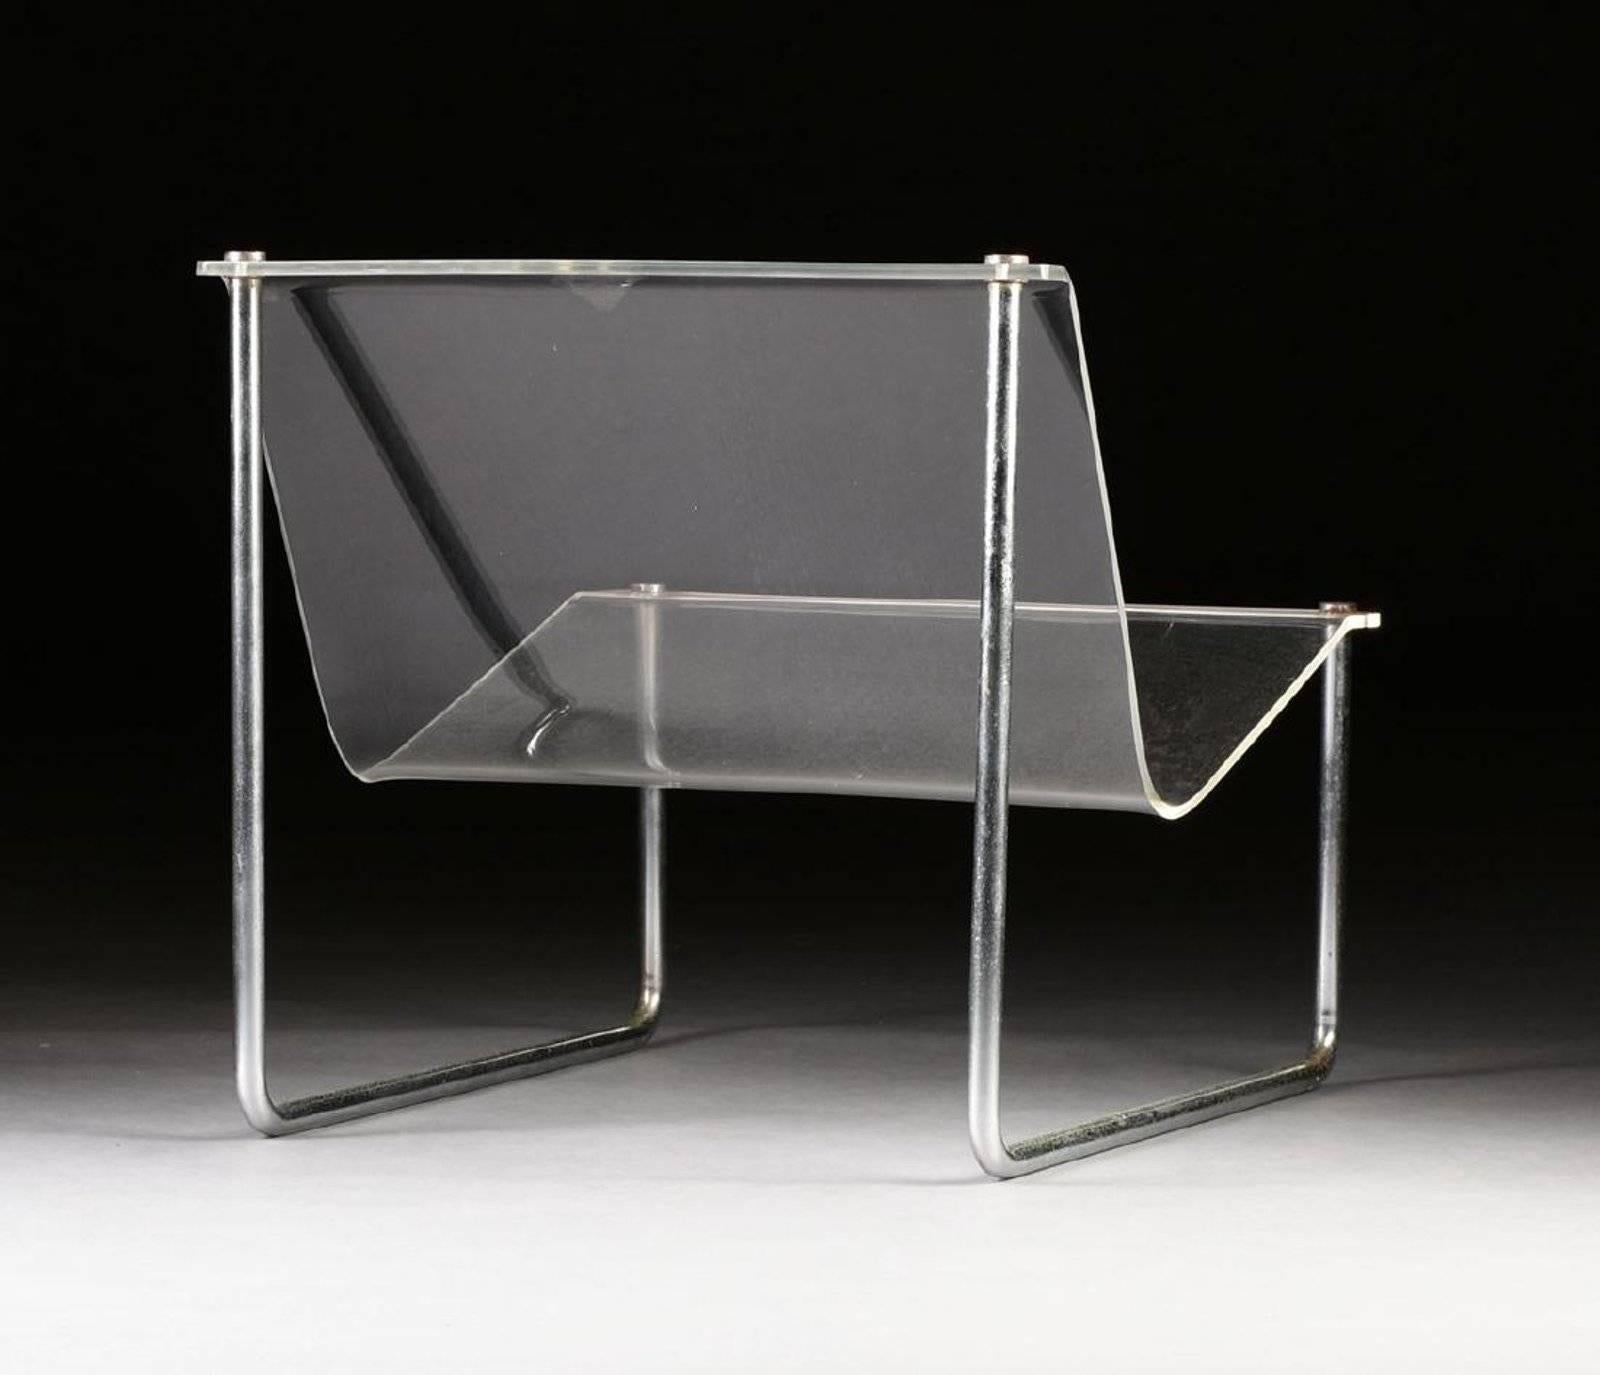 Charles Hollis Jones sling chair, 
USA, 1969
acrylic, chrome-plated steel
Measures: 24.75 W x 27 D x 24.25 H inches
Literature: Charles Hollis Jones, Jones and Wolf.

 